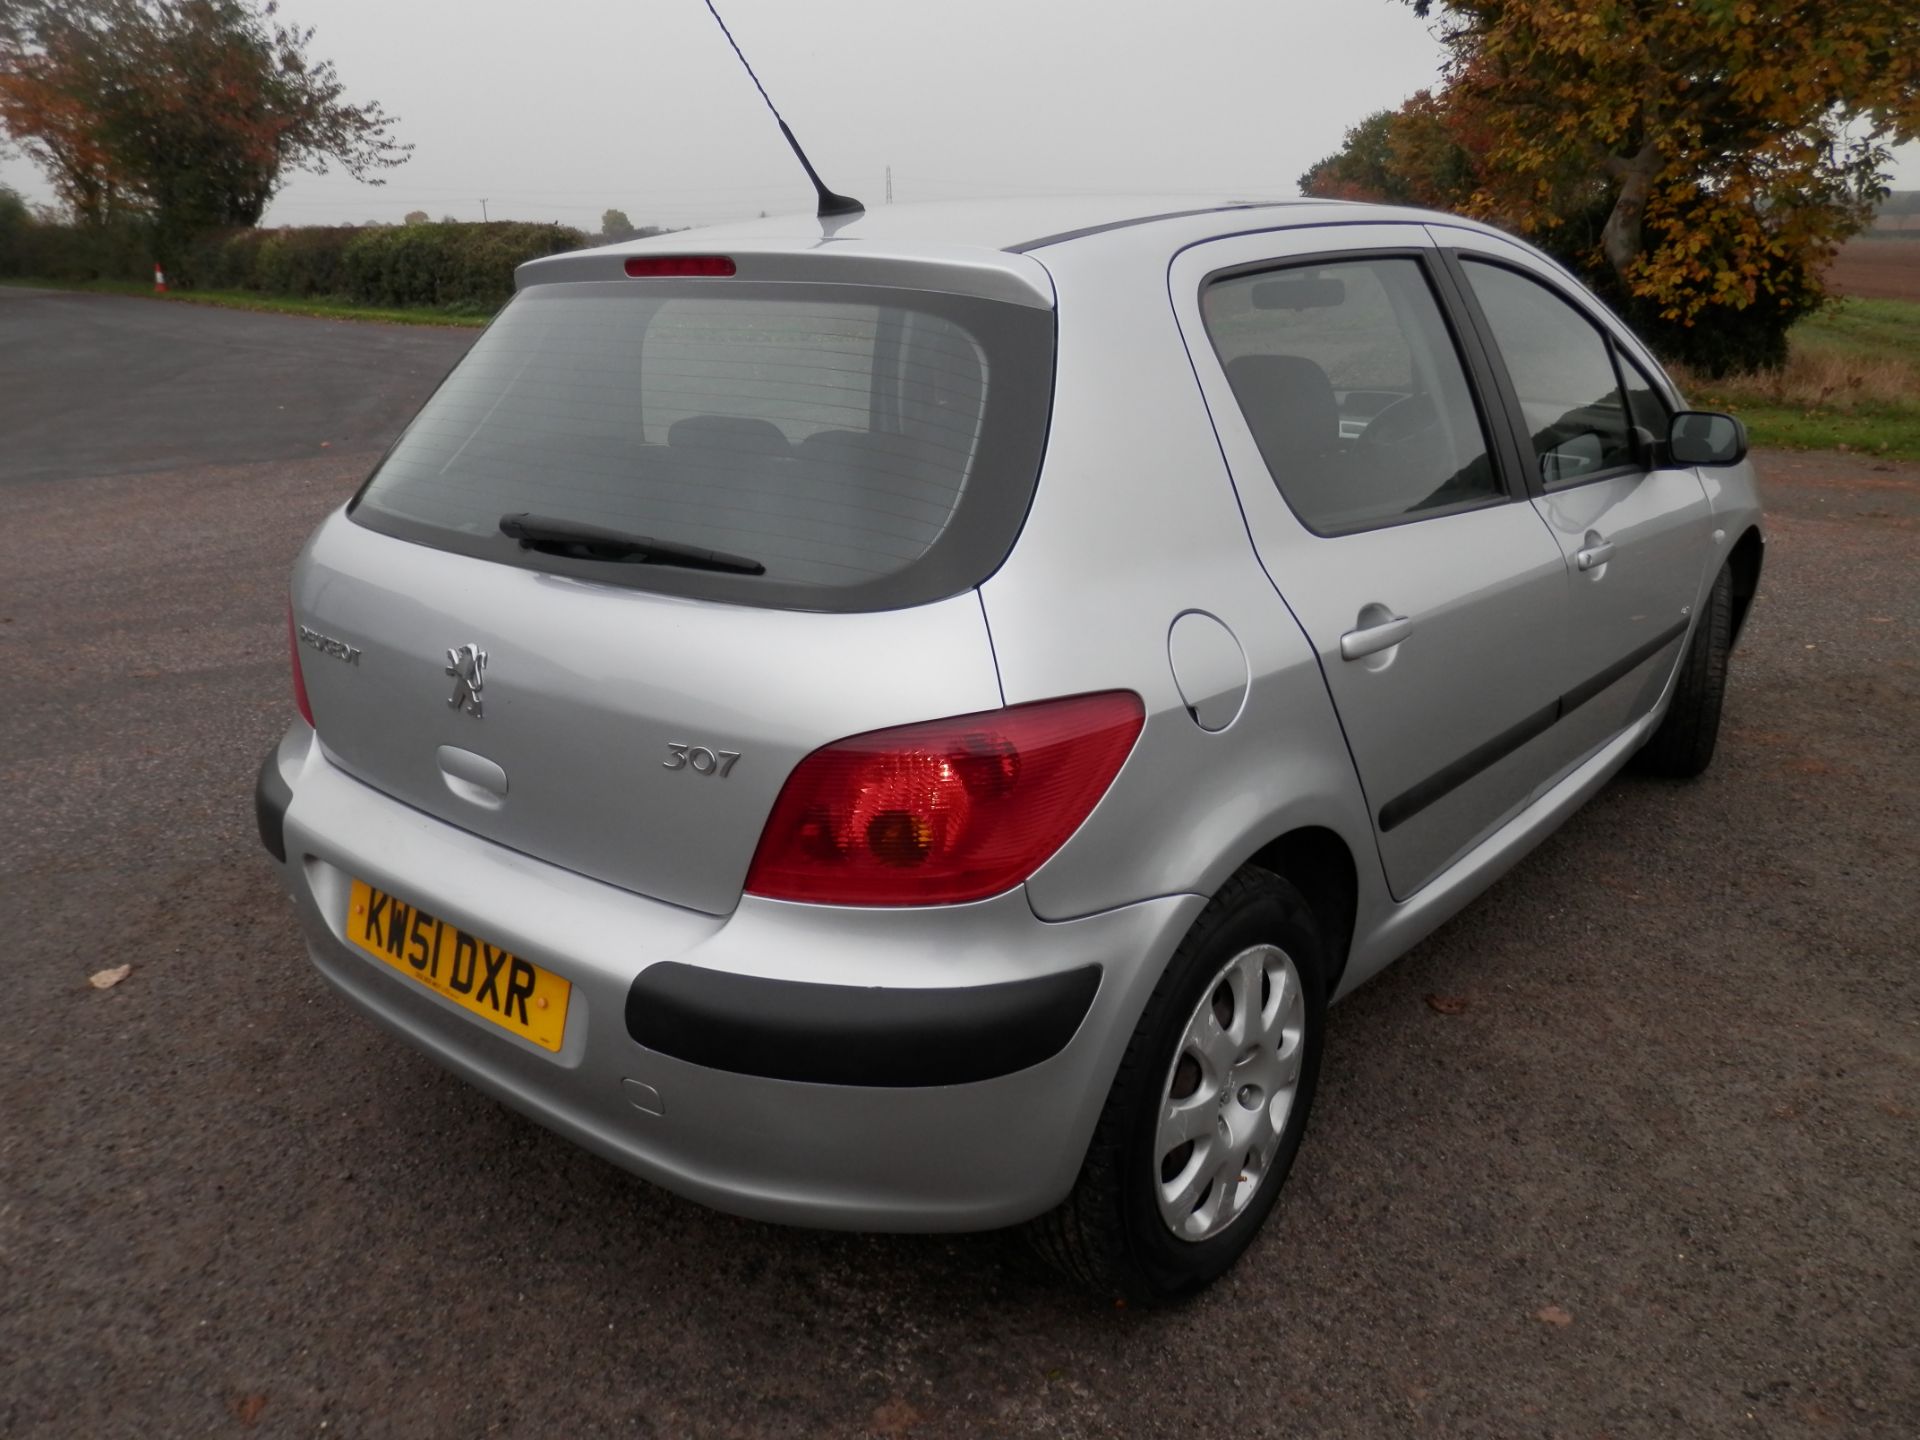 2002/51 PLATE PEUGEOT 307 1.6 LX AUTOMATIC, ONLY 51K WARRANTED MILES & MOT MAY 2017, GREAT CAR. - Image 5 of 22